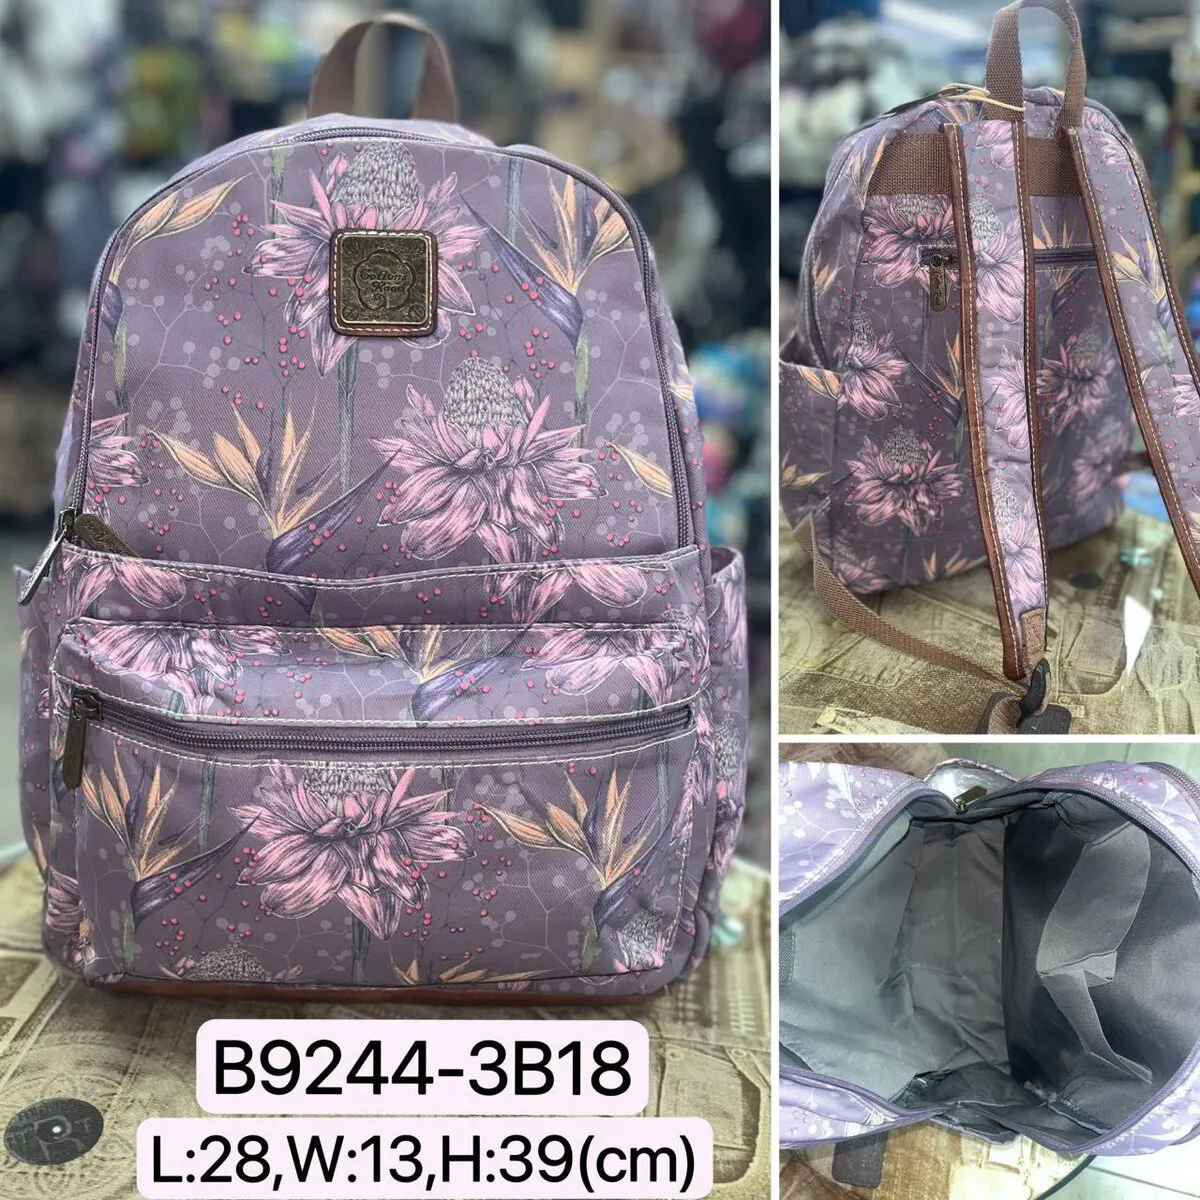 Cotton Road Backpack B9244